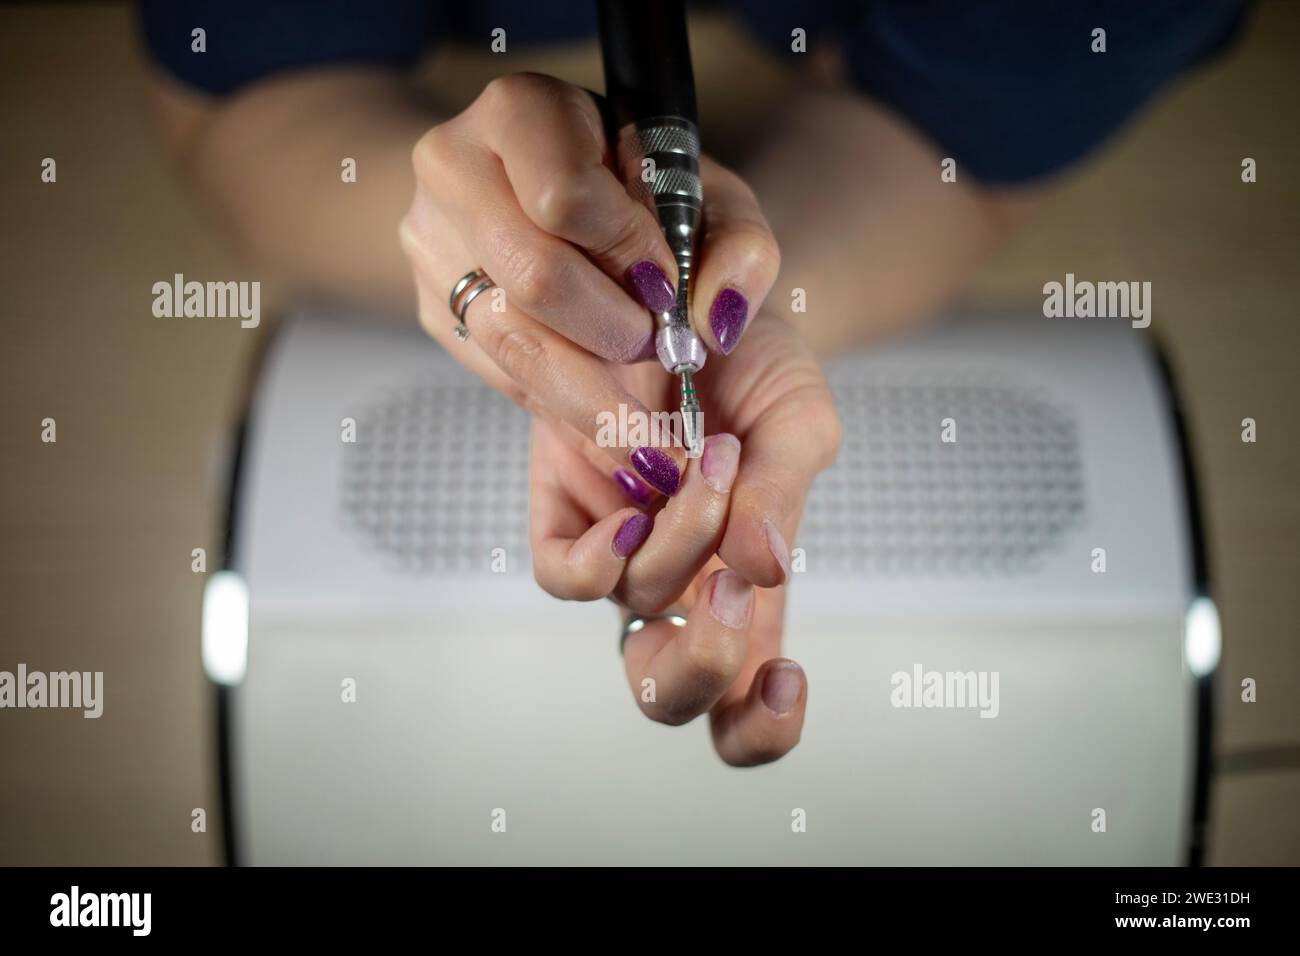 Detailed close up of unrecognisable female removing her own nail polish with electric file over a dust collector, DIY manicure close up Stock Photo